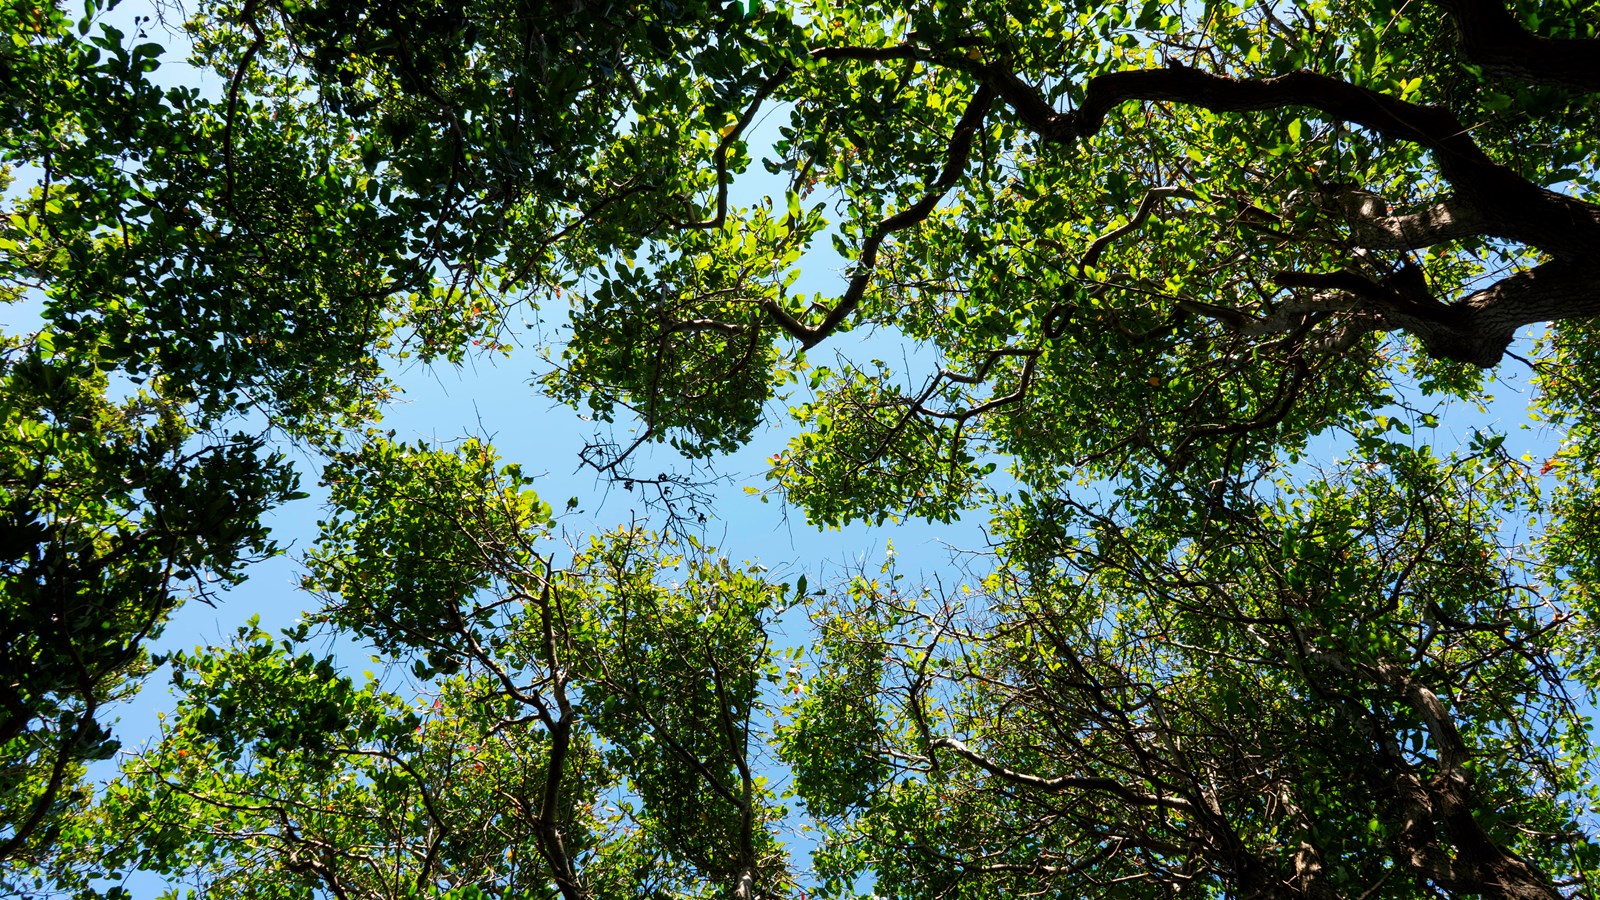 A view of a canopy of trees overhead standing beneath a blue sky.